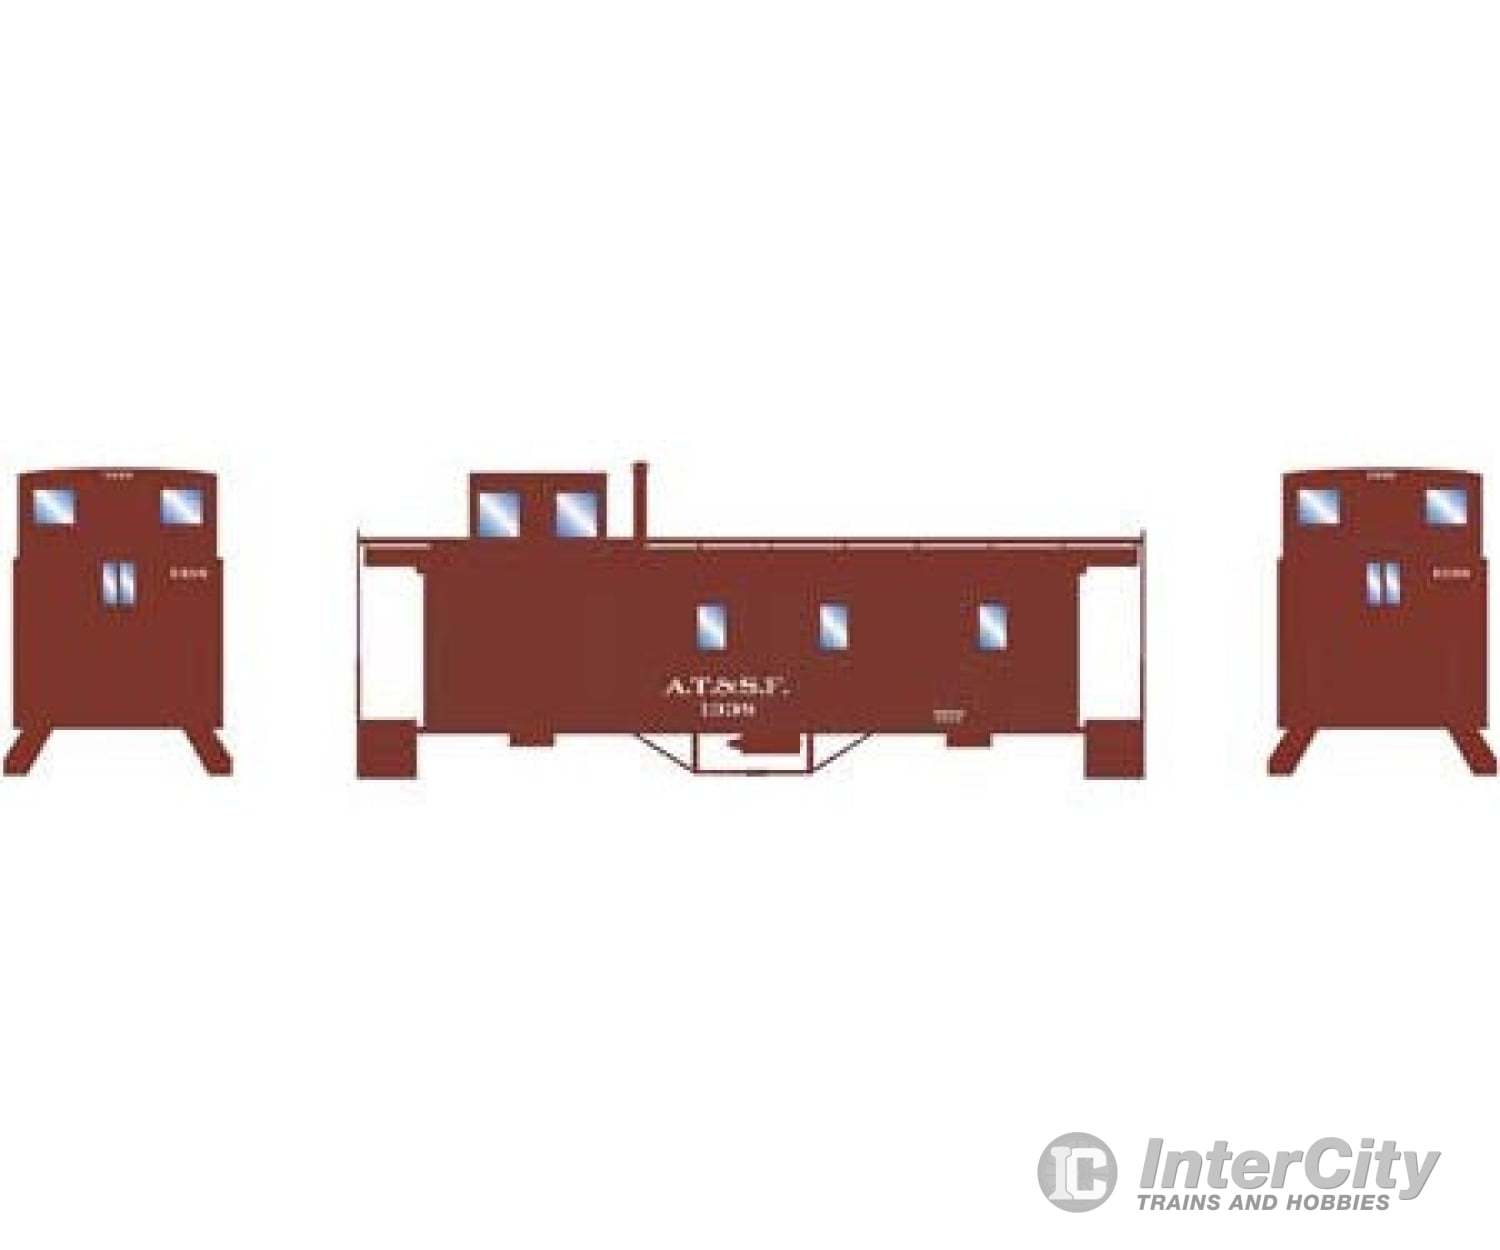 Athearn Ath14467 N 3-Window Wood Cabooses Atsf Side Caboose 1339 Freight Cars